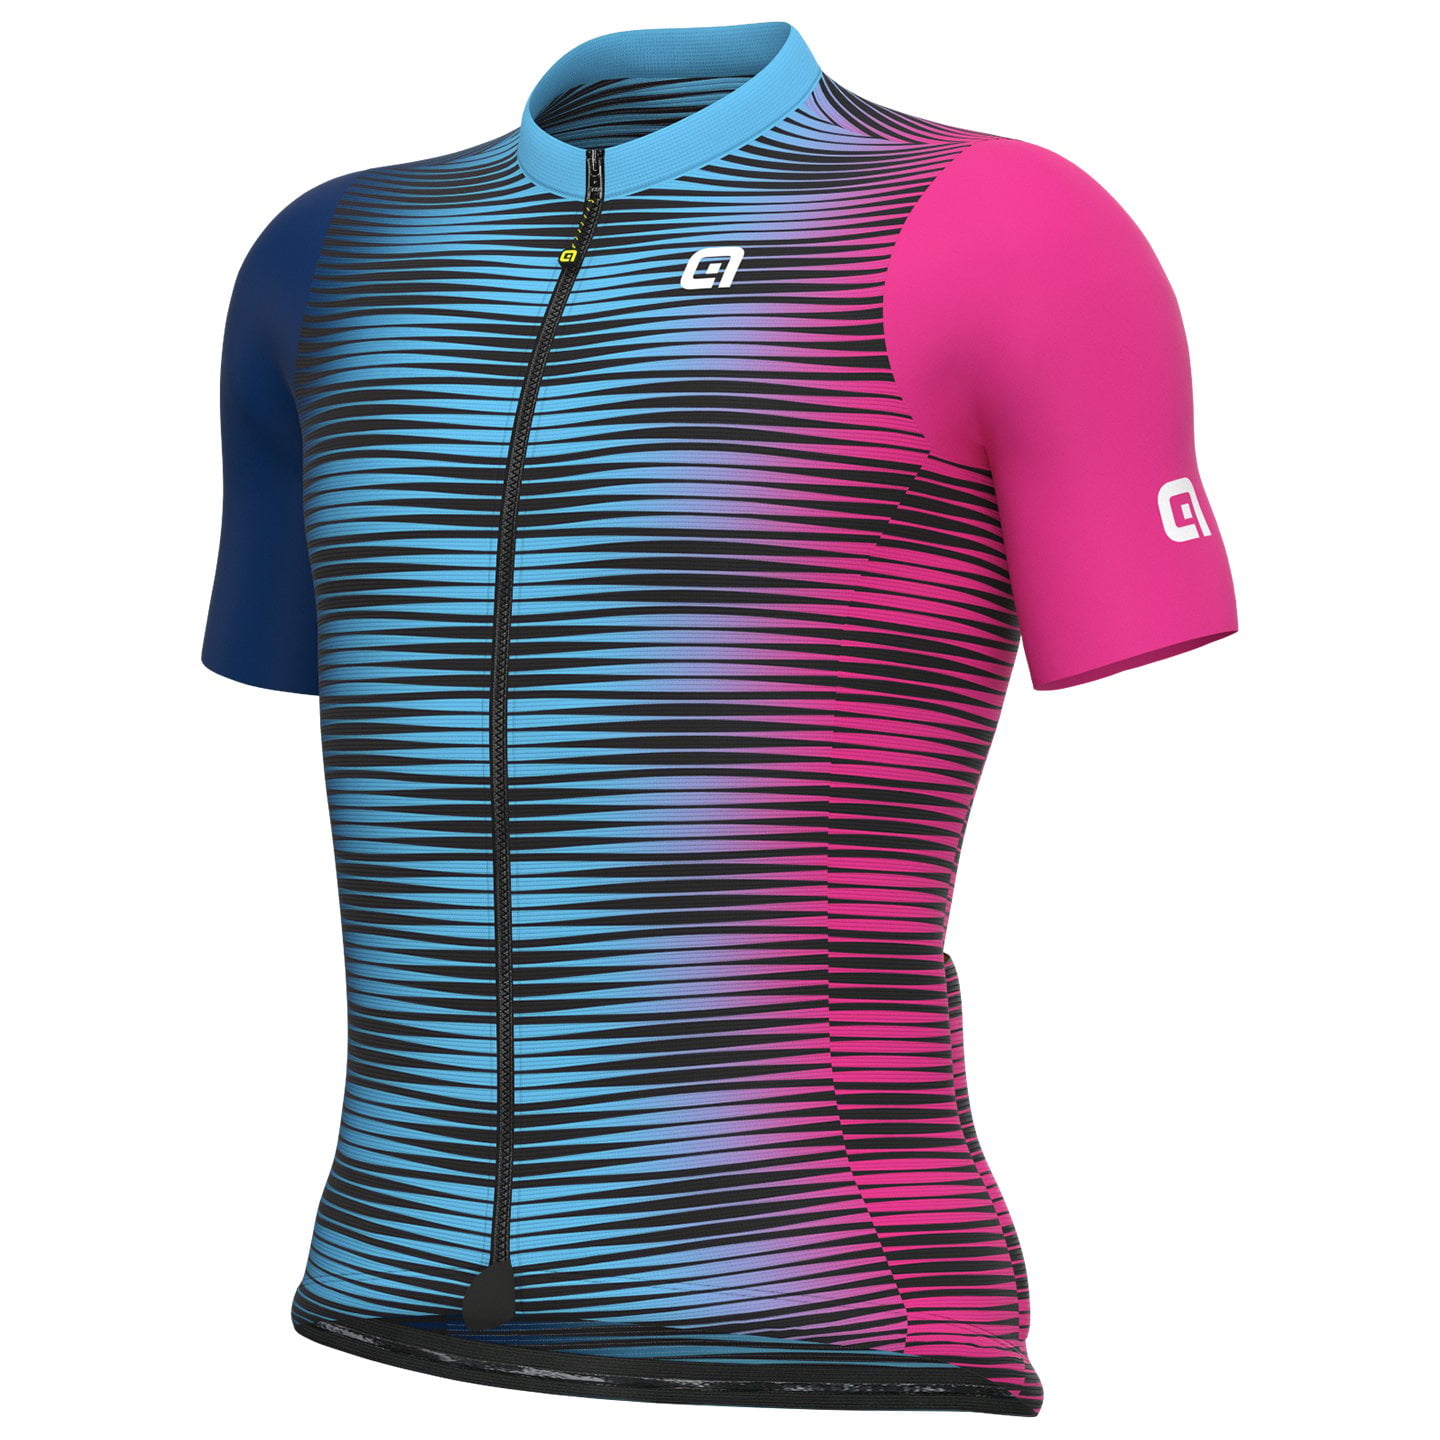 ALE Dinamica Short Sleeve Jersey Short Sleeve Jersey, for men, size M, Cycling jersey, Cycling clothing